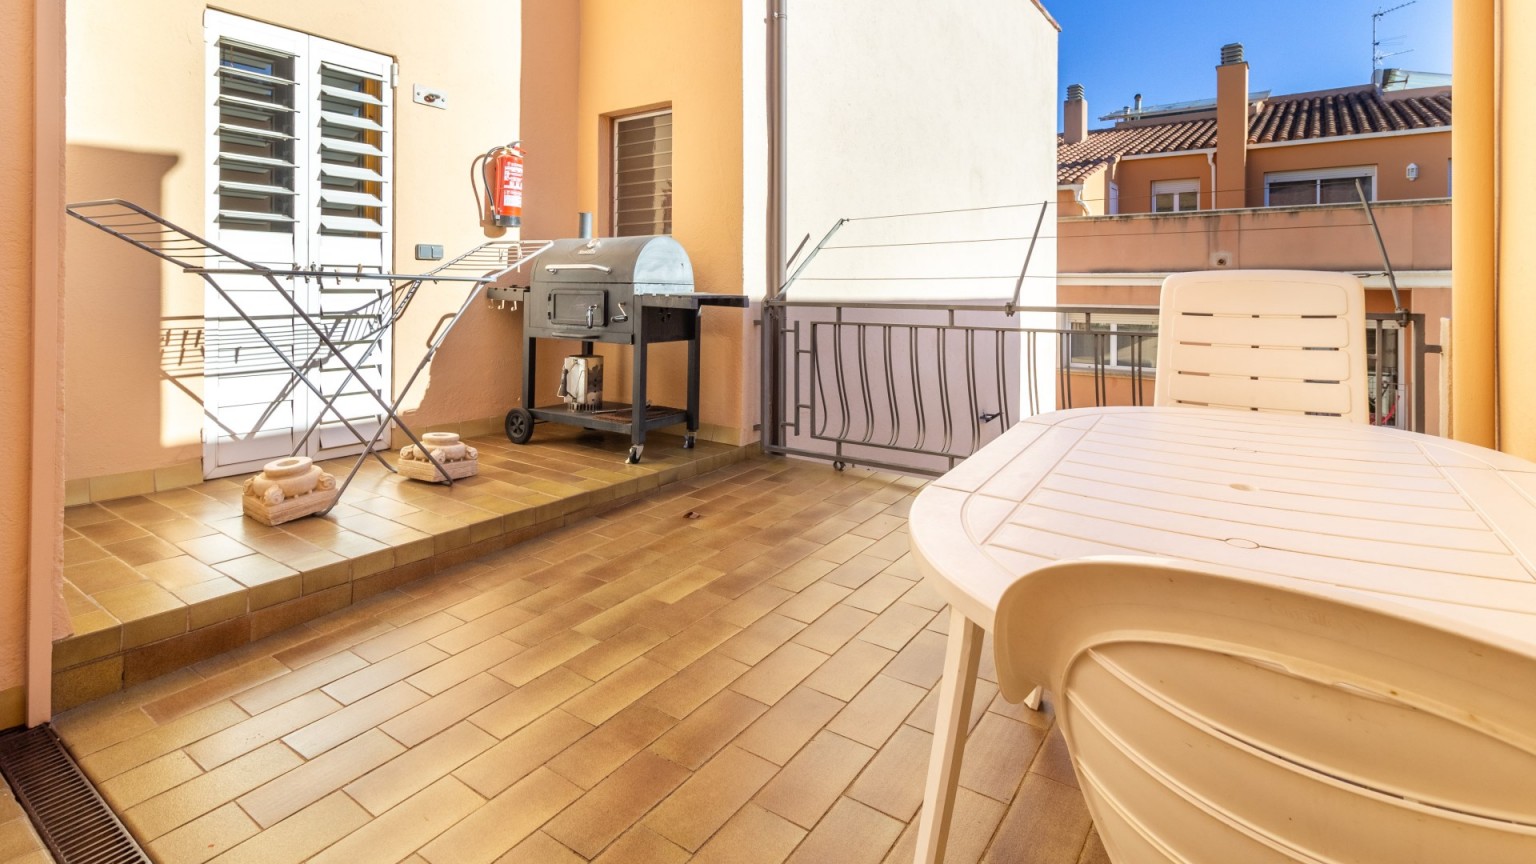 Spacious flat for sale, in the city centre, with a large terrace.